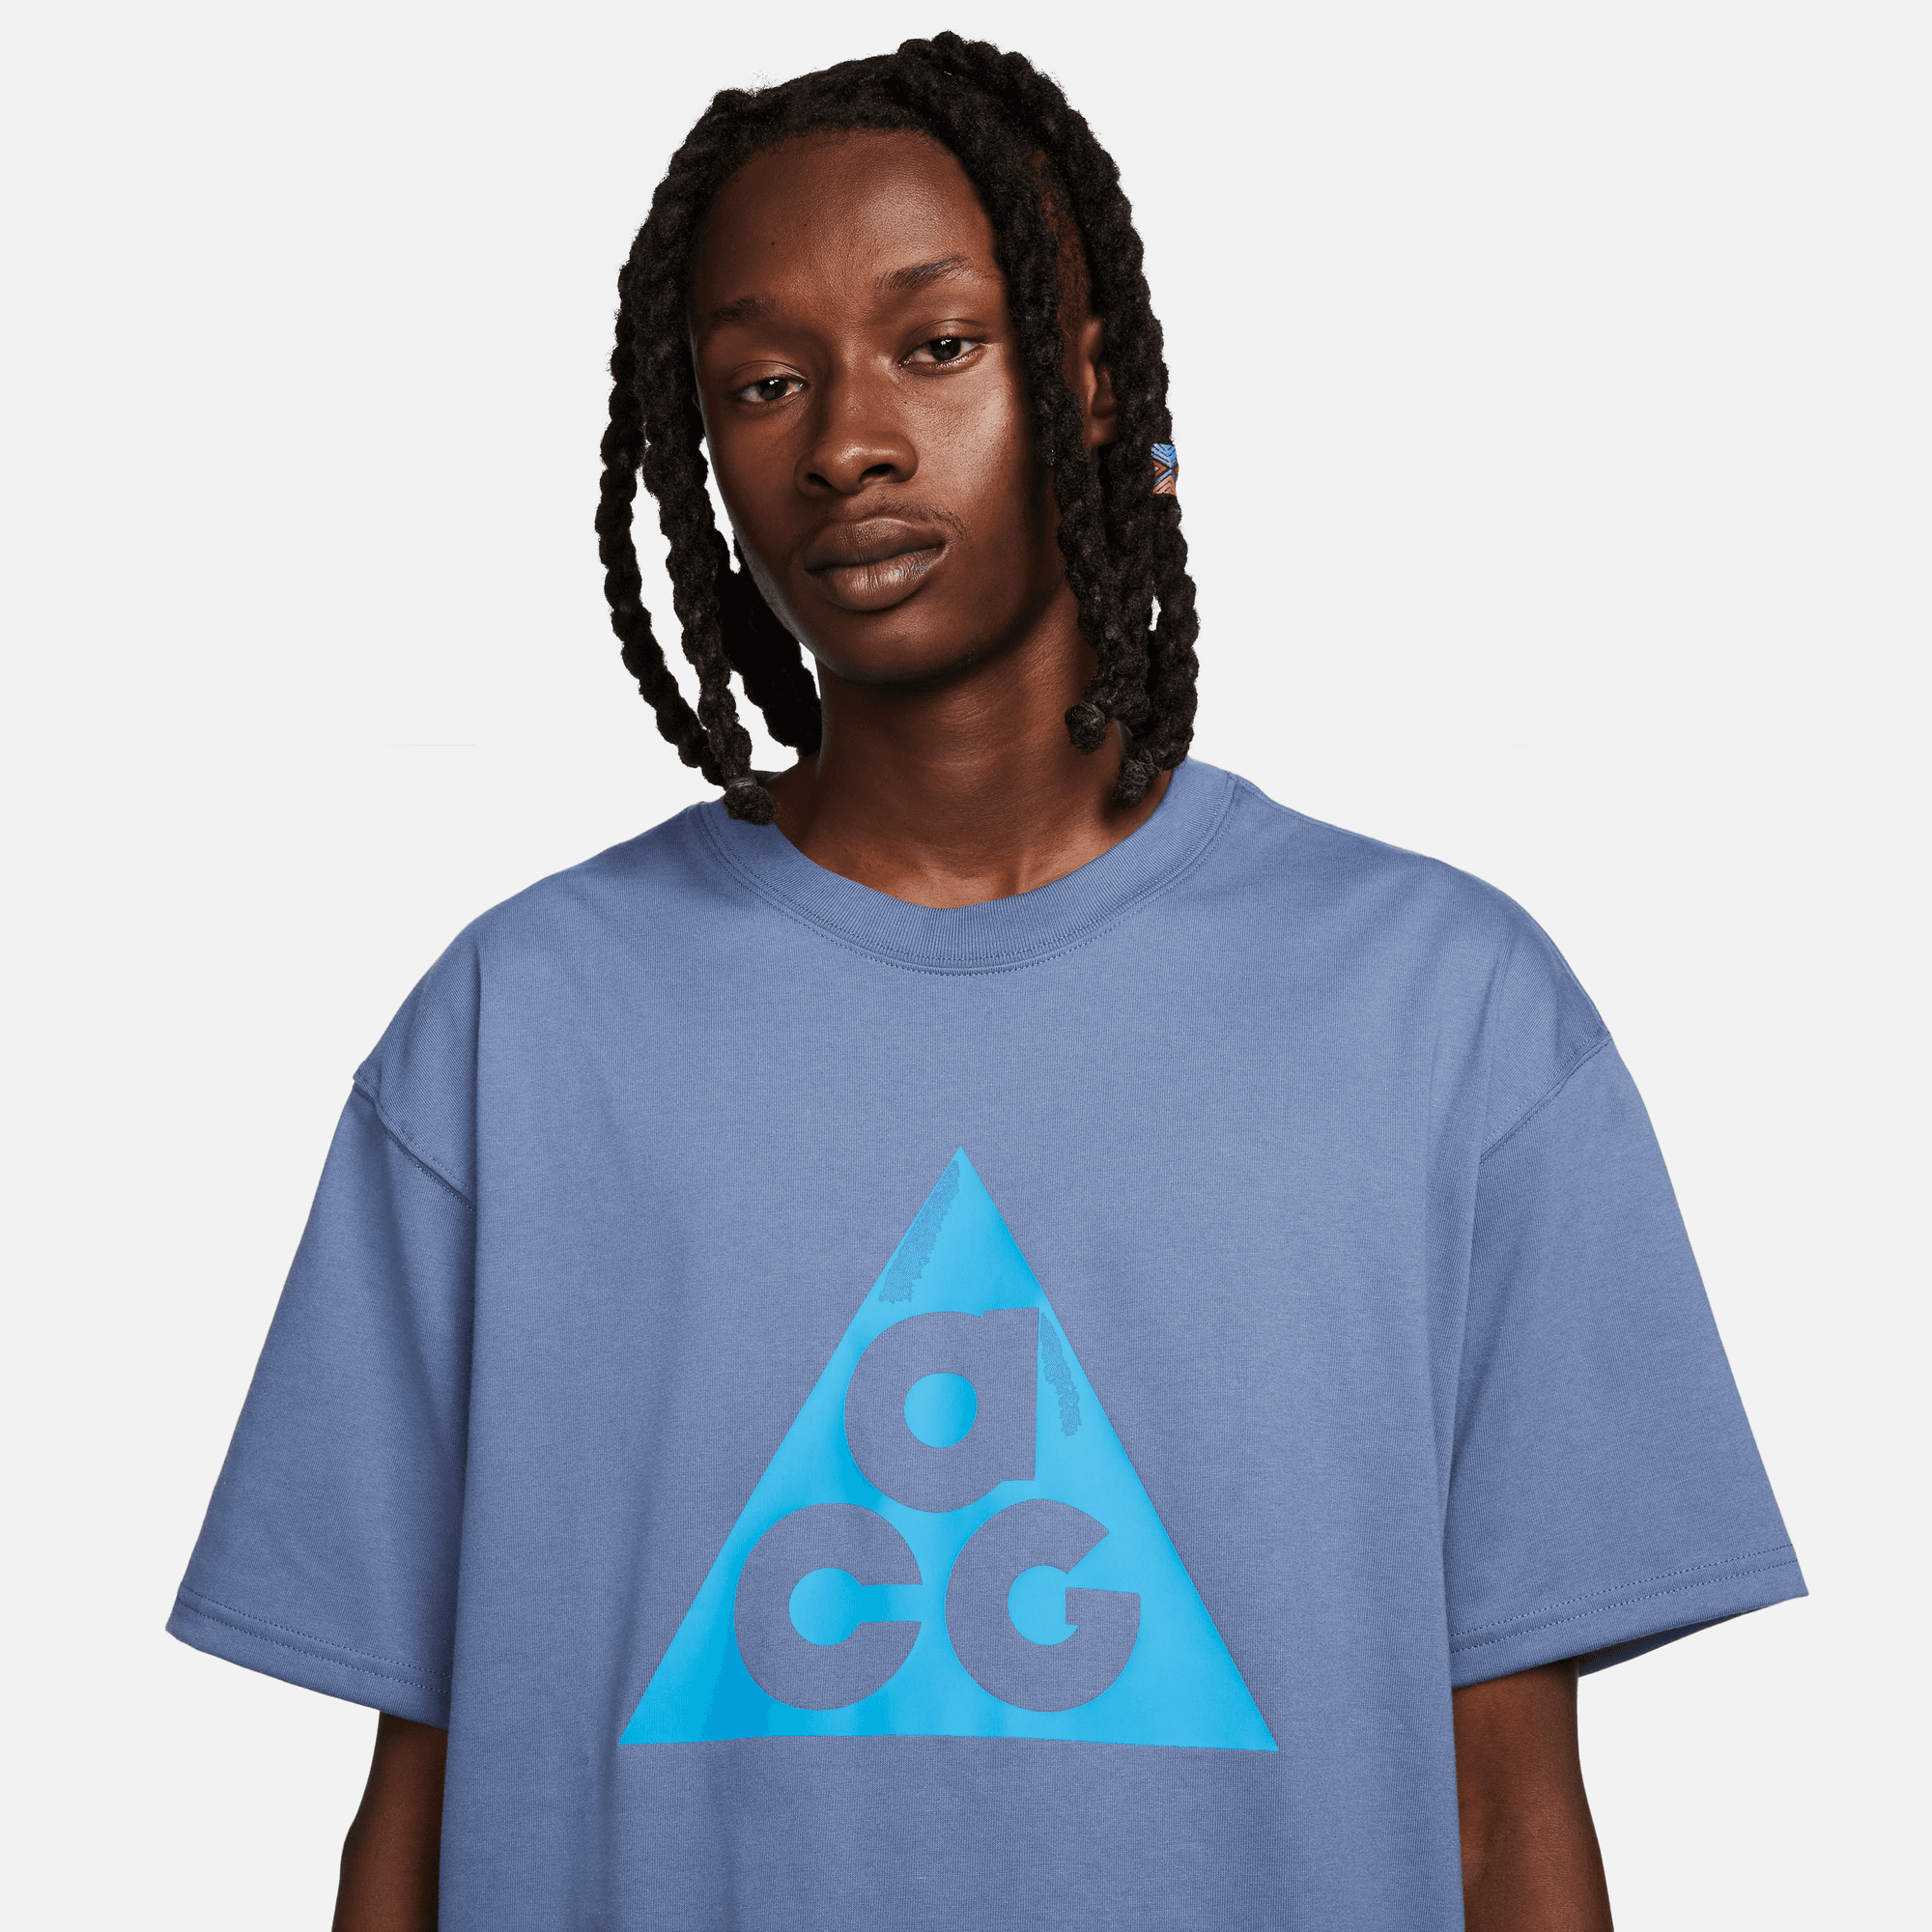 ACG MENS S/S TEE - DIFFUSED BLUE